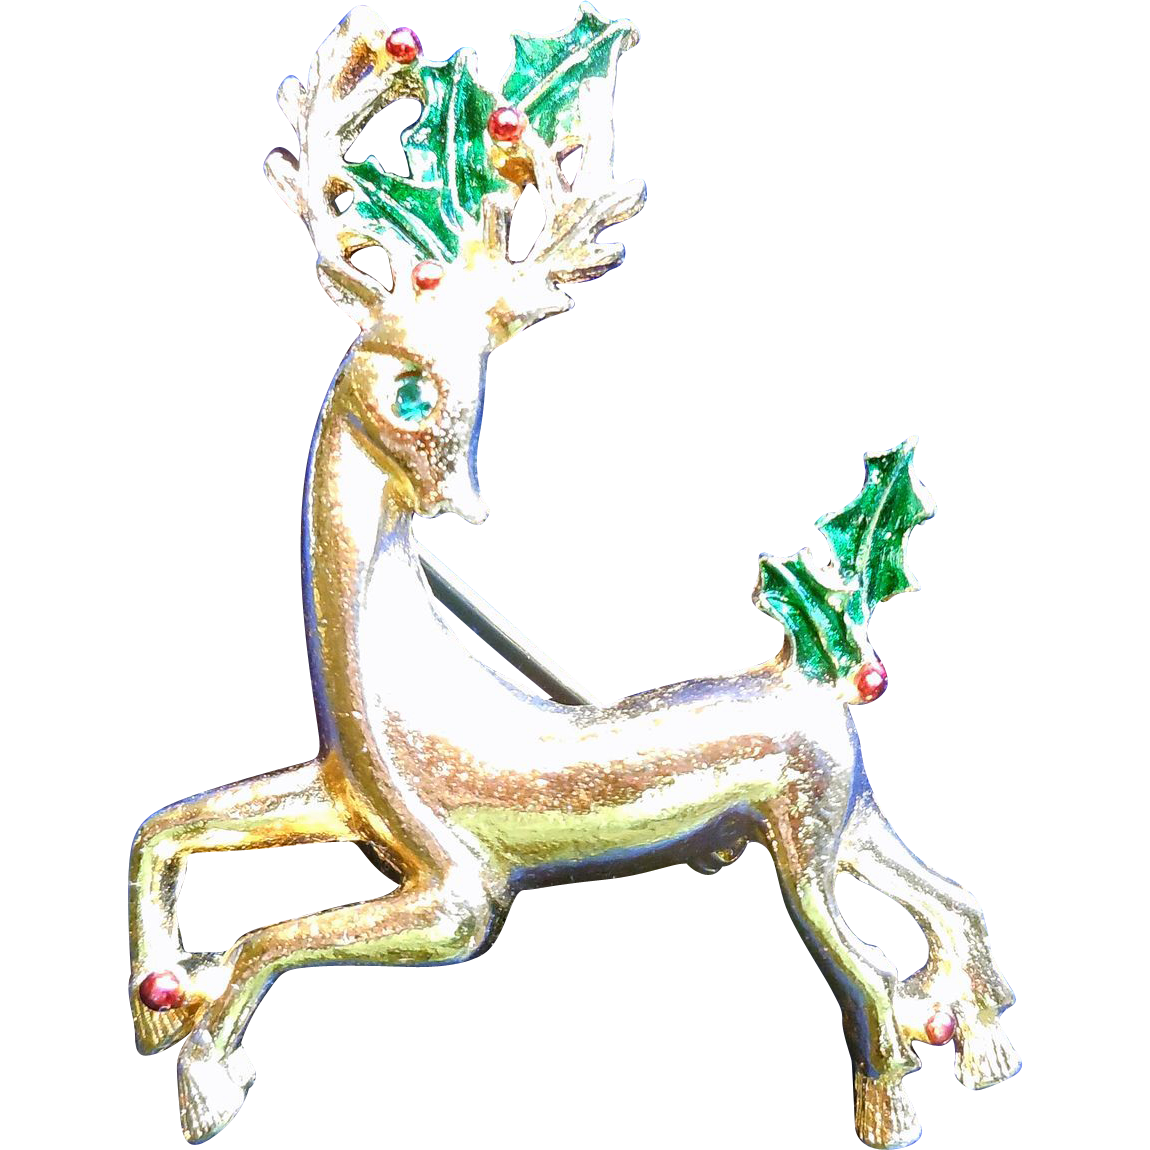 clipart reindeer pin the tail on